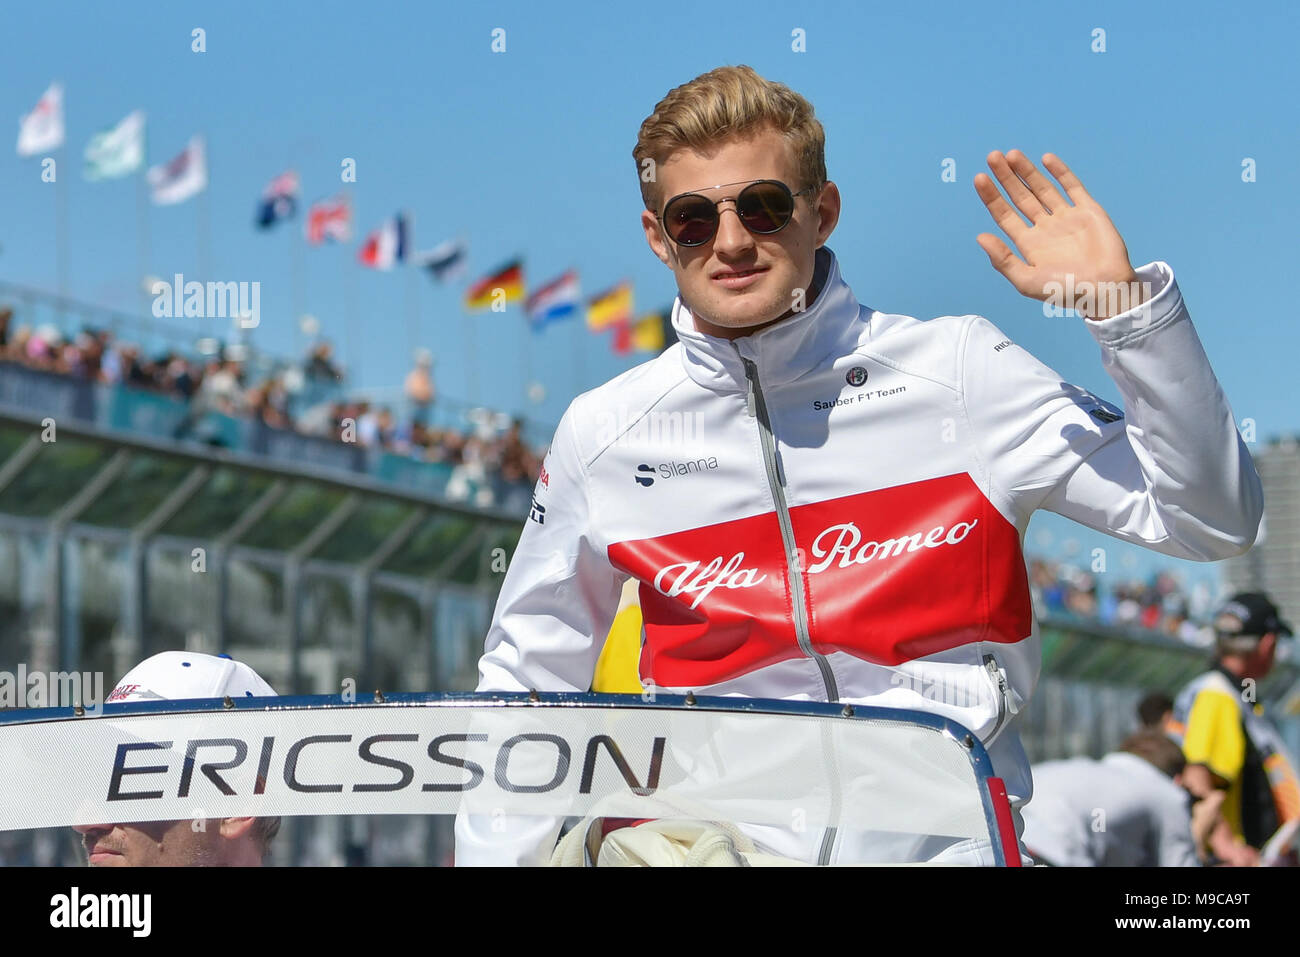 Albert Park, Melbourne, Australia. 25th Mar, 2018. Marcus Ericsson (SWE) #9 from the Alfa Romeo Sauber F1 Team waves to the crowd during the drivers' parade at the 2018 Australian Formula One Grand Prix at Albert Park, Melbourne, Australia. Sydney Low/Cal Sport Media/Alamy Live News Stock Photo